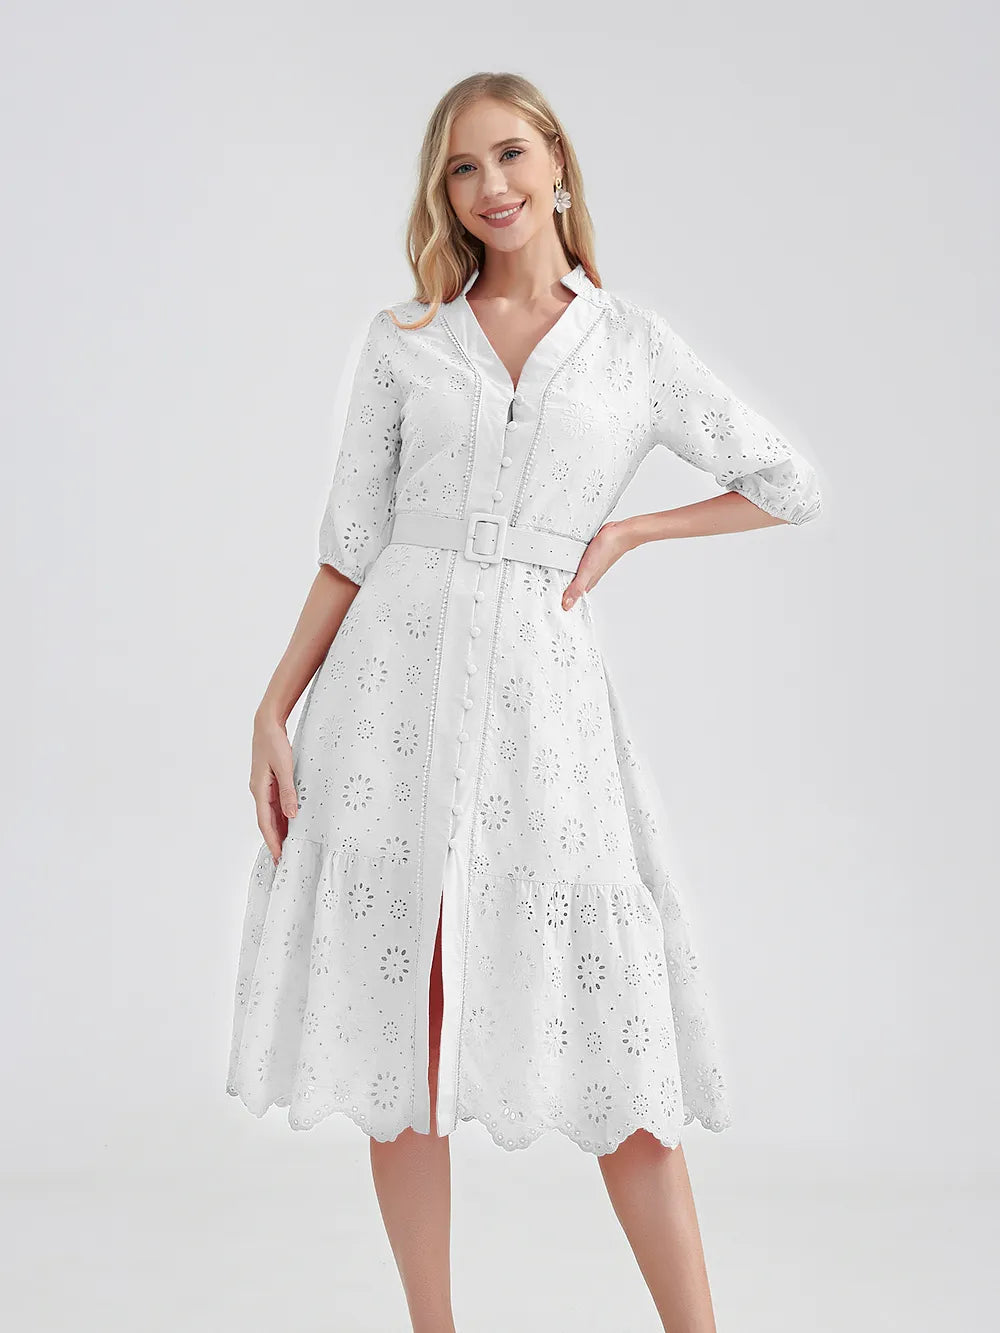 Cotton Hollow Out Summer Dress Women Holiday Perppy Casual High Waist Ruffled Mini V-Neck Dresses A-line Frills Vestido voguable